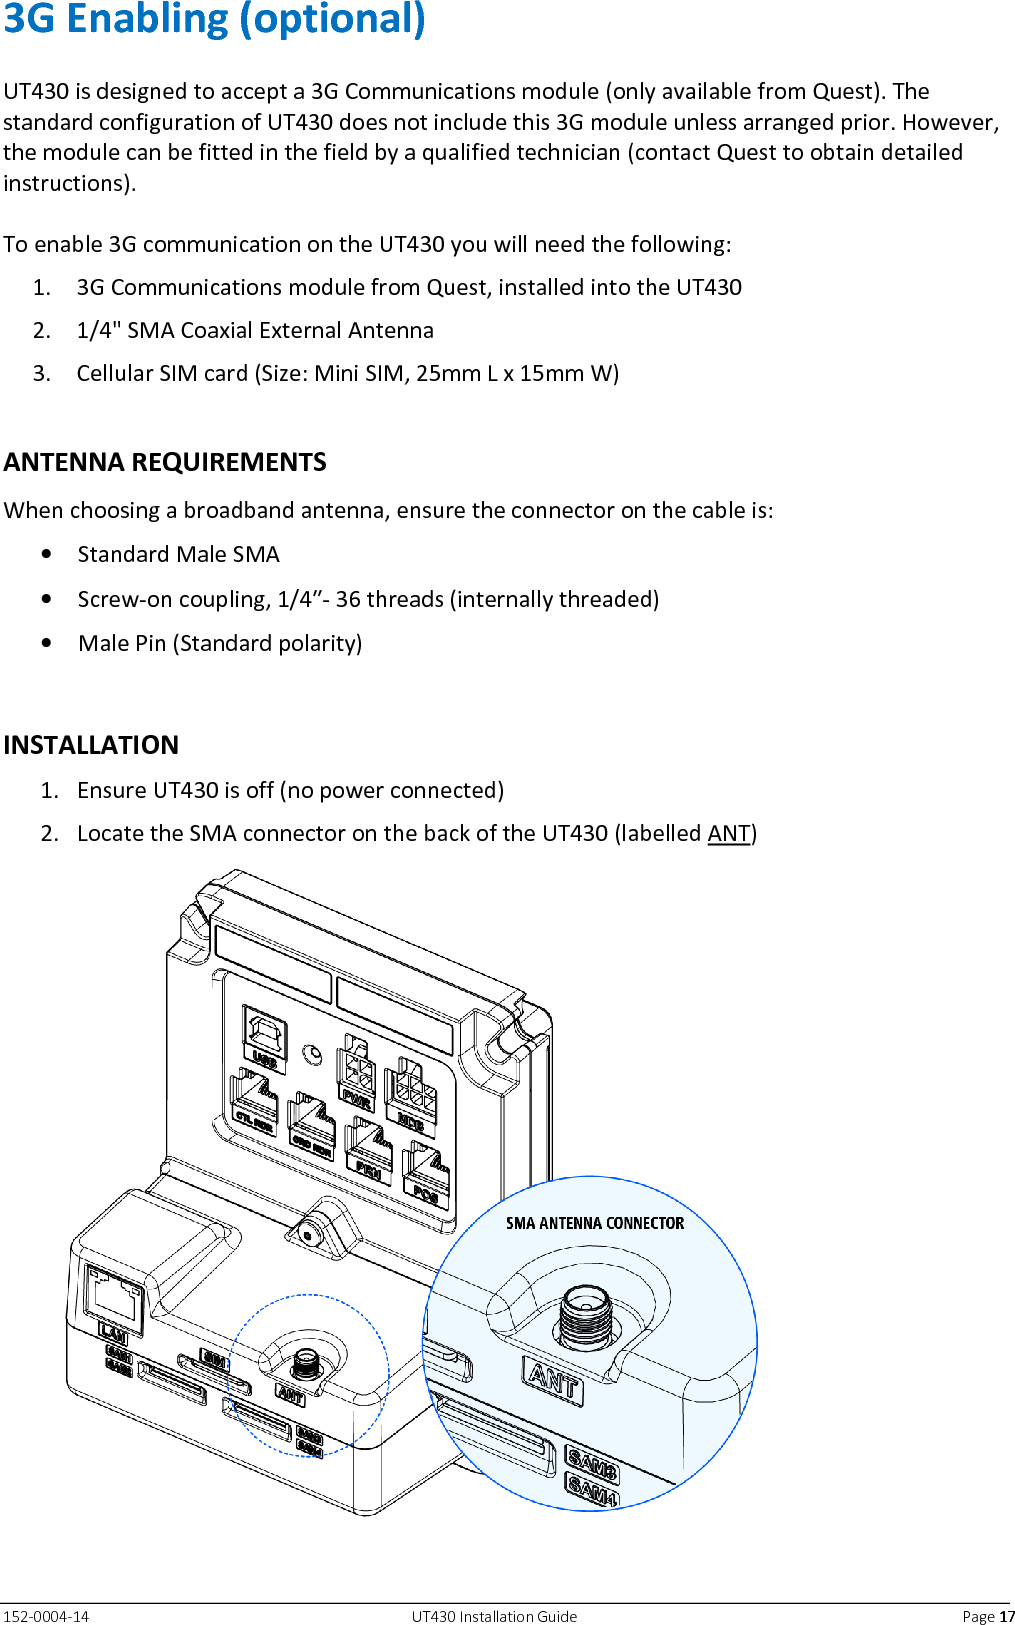   152-0004-14  UT430 Installation Guide  Page 18181818    